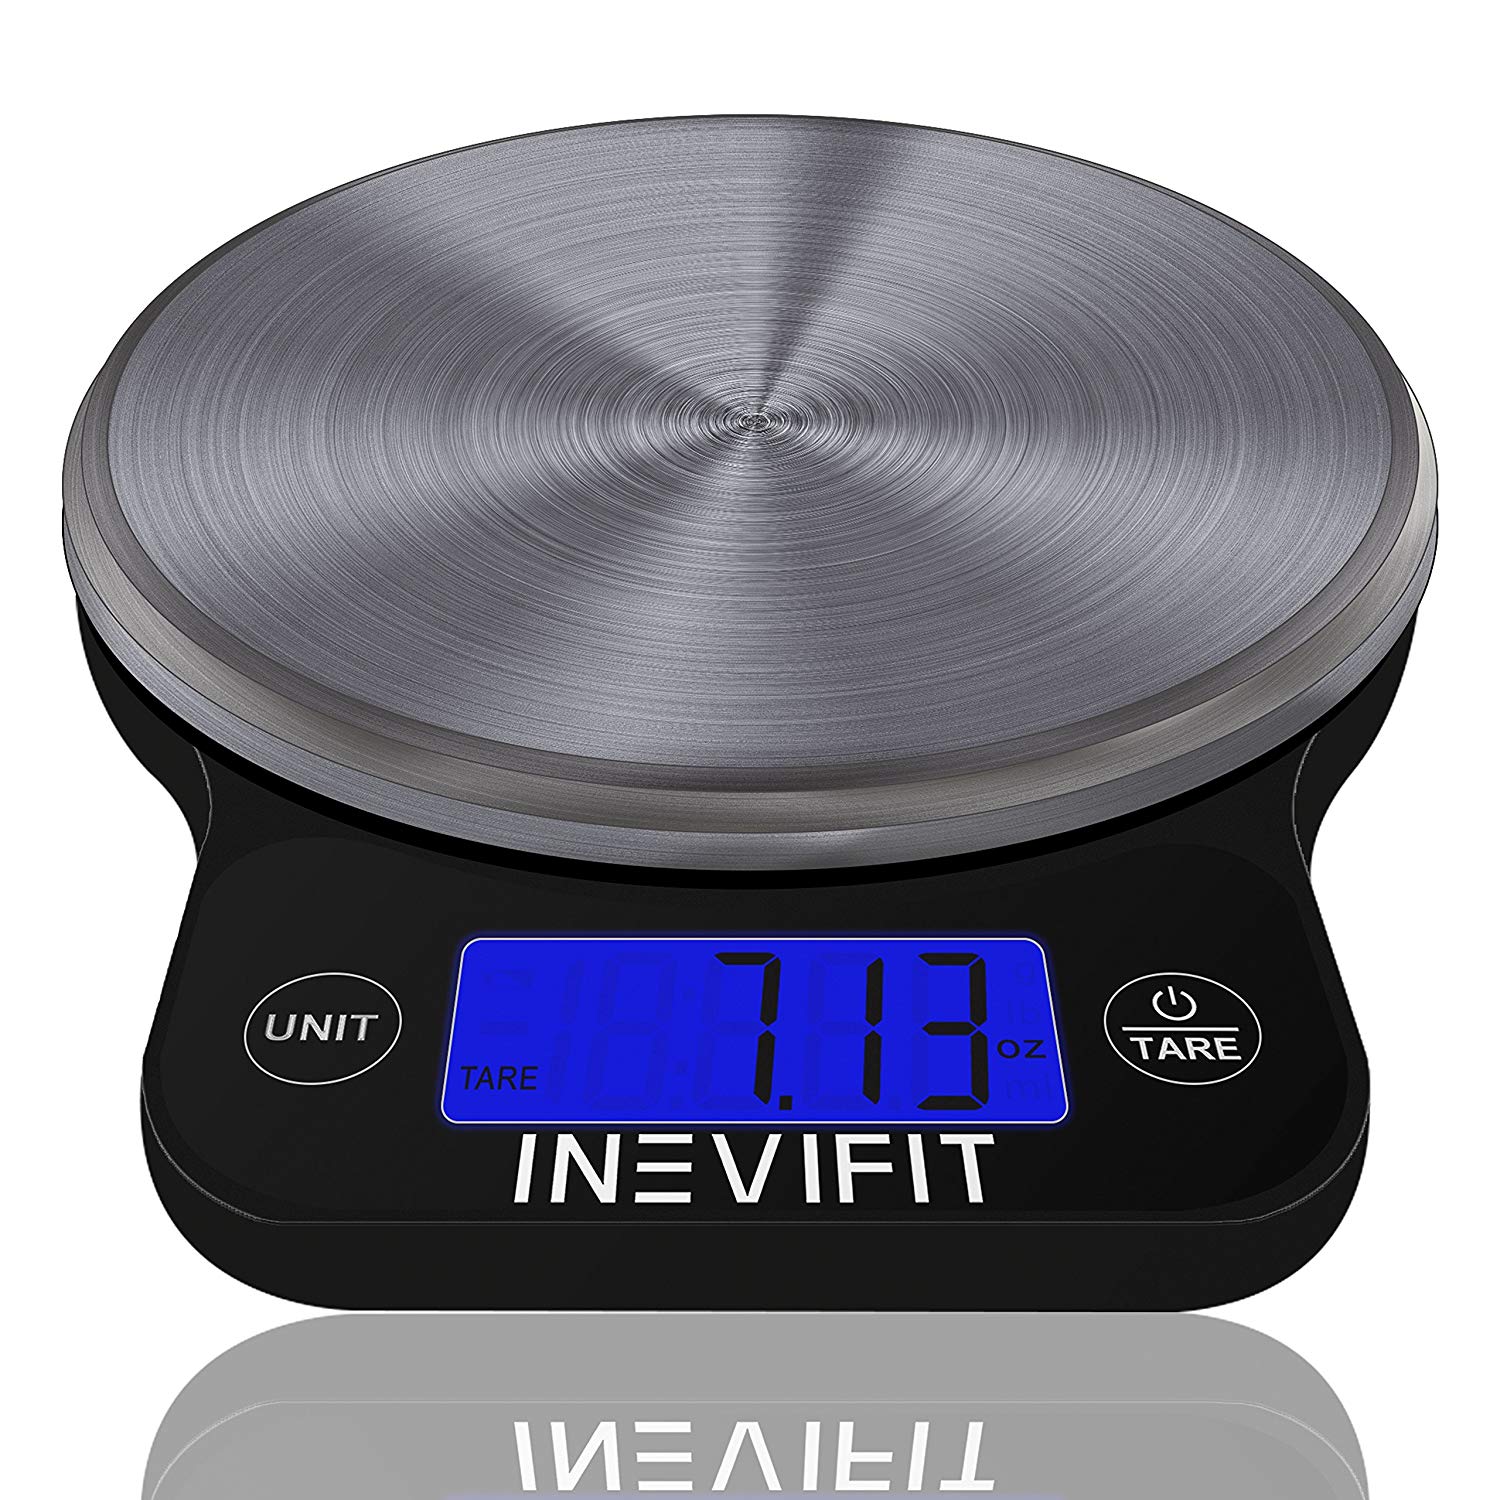 INEVIFIT Backlit LCD Daily Use Kitchen Scale